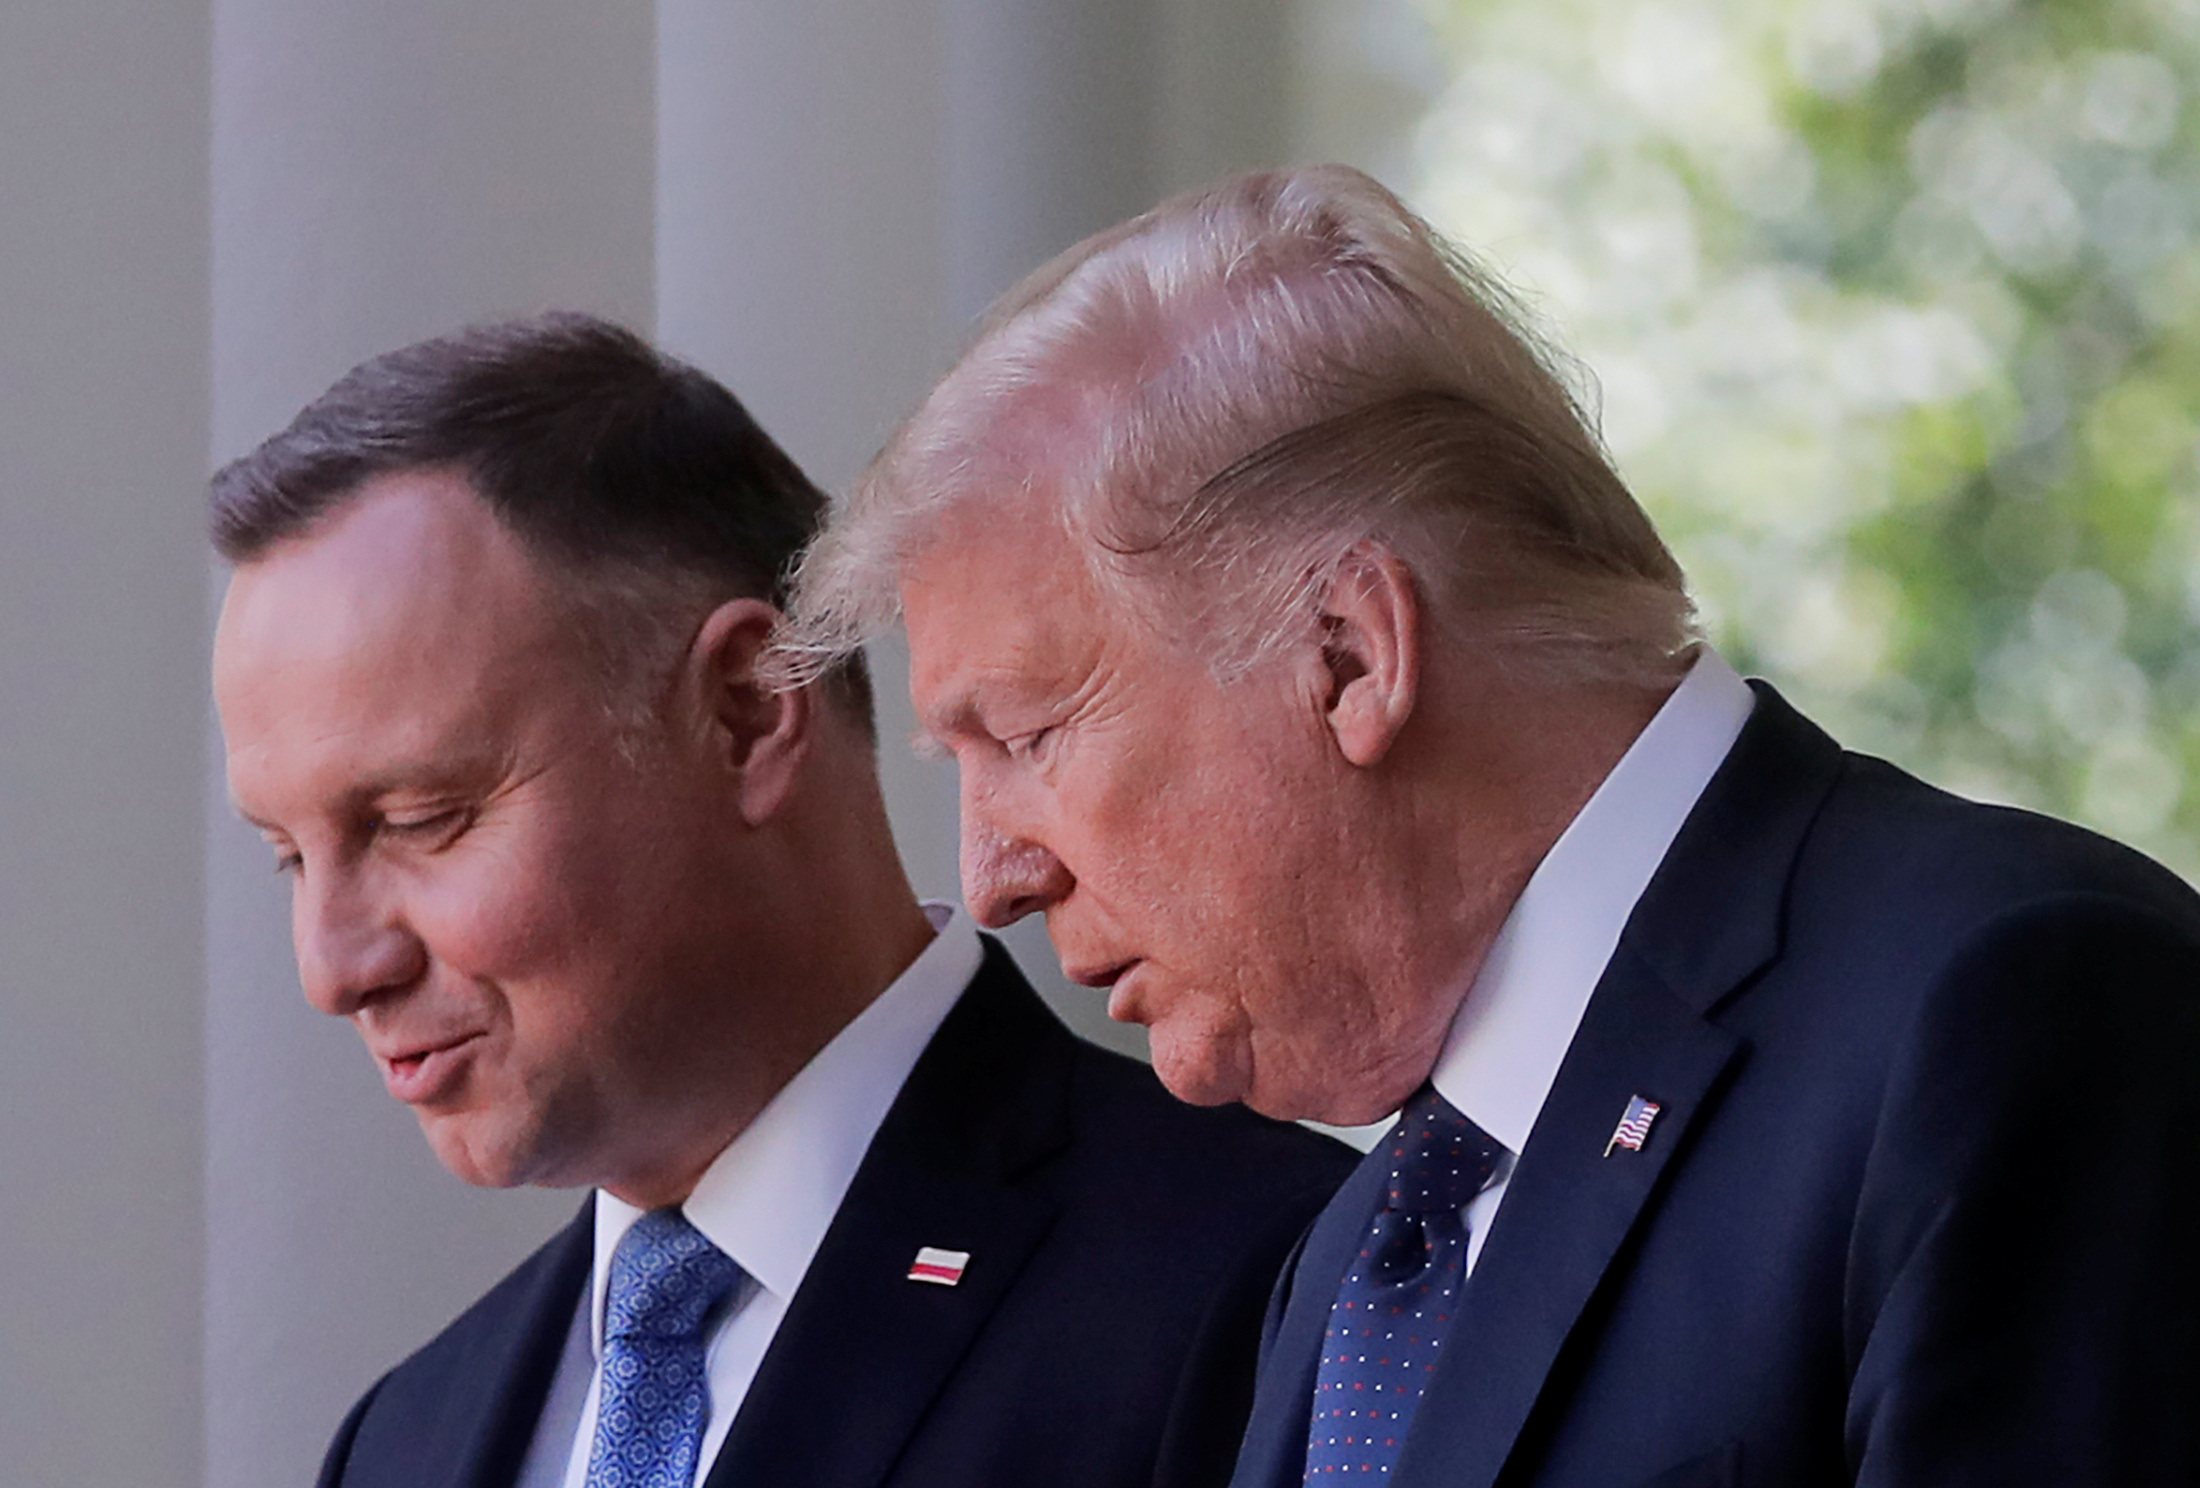 U.S. President Trump and Poland's President Duda hold joint news conference at the White House in Washington